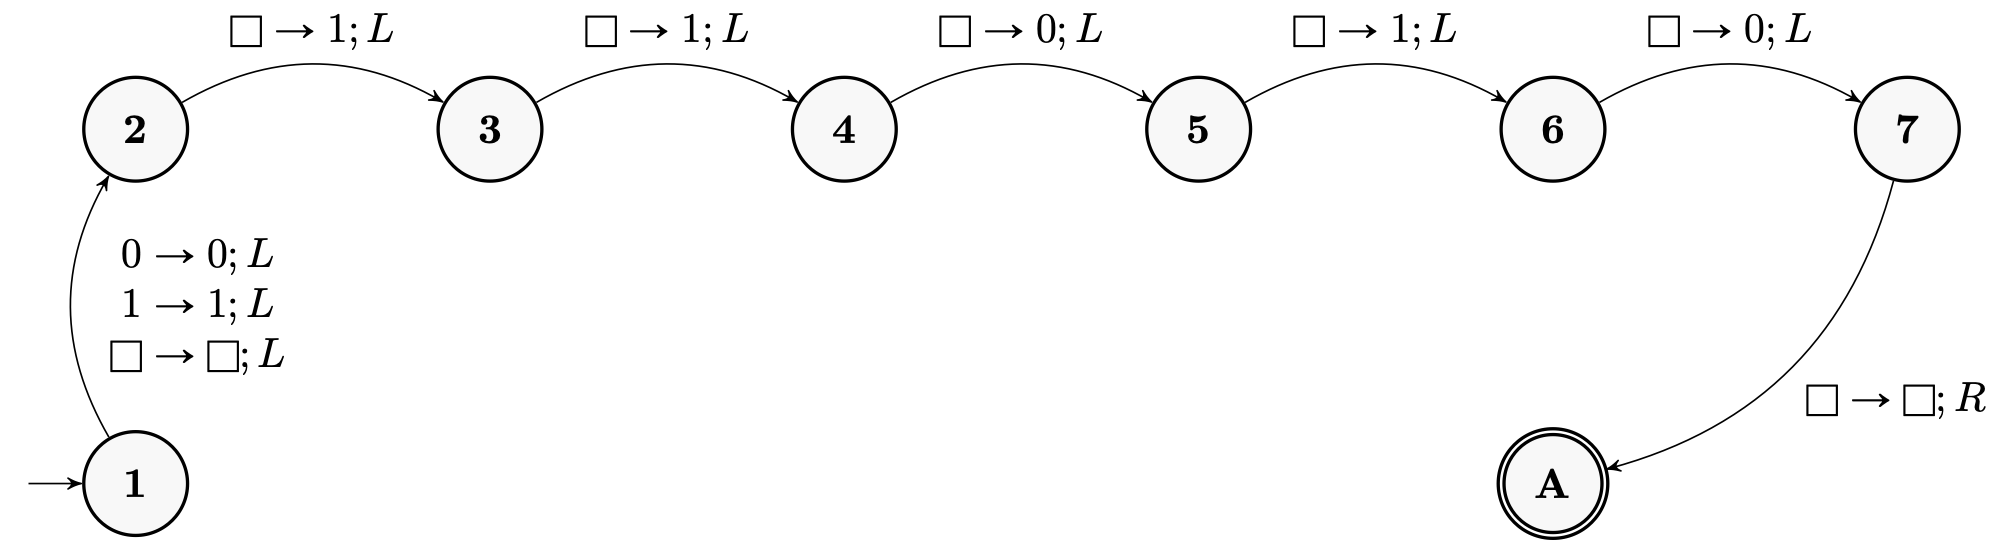 Diagram of the Turing machine that prepends 01011 to the input string.